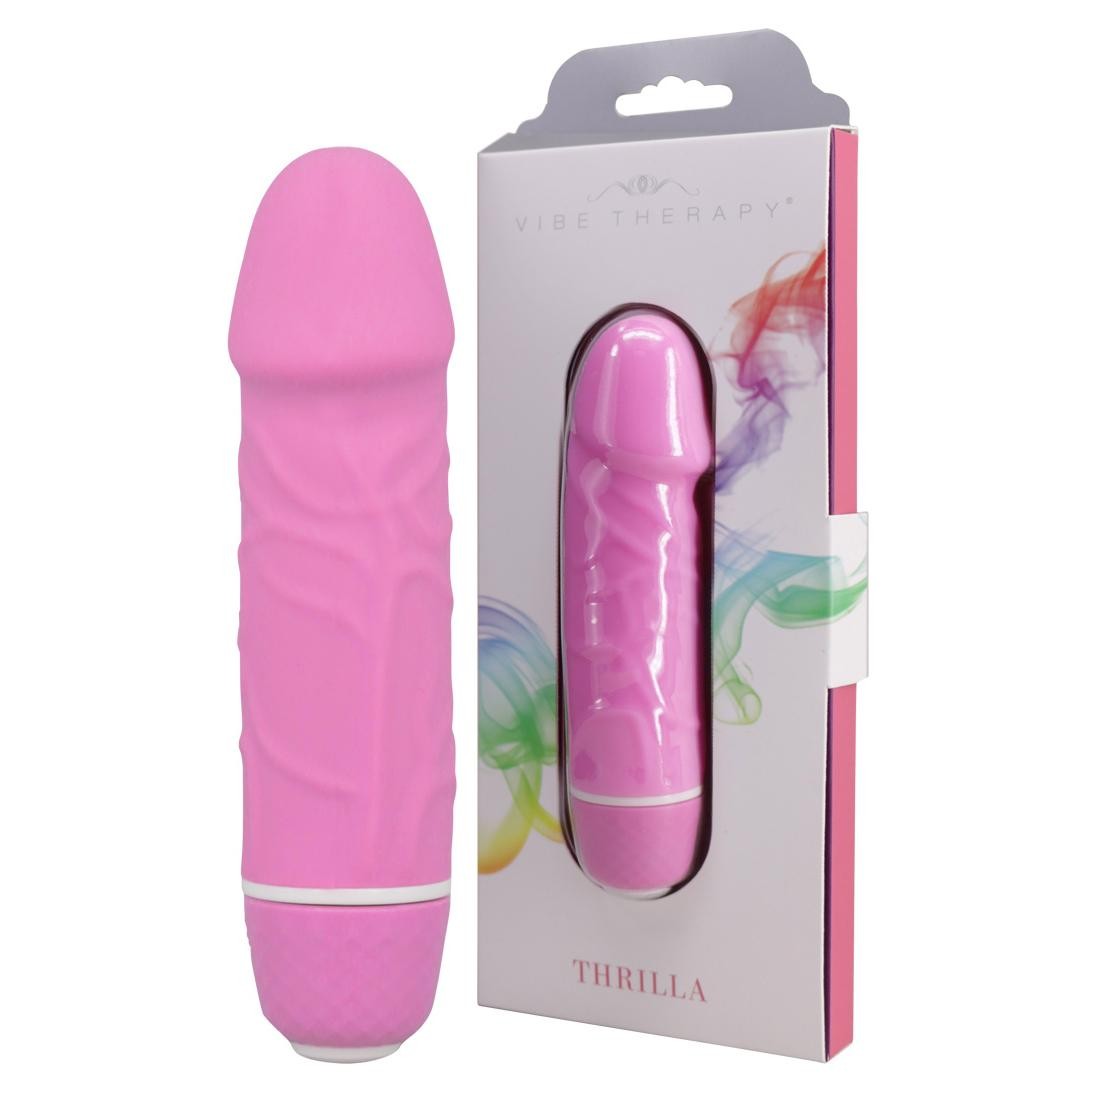  Vibe  Therapy  -  Vibe  Therapy  Thrilla  Pink  -  Vibrator 